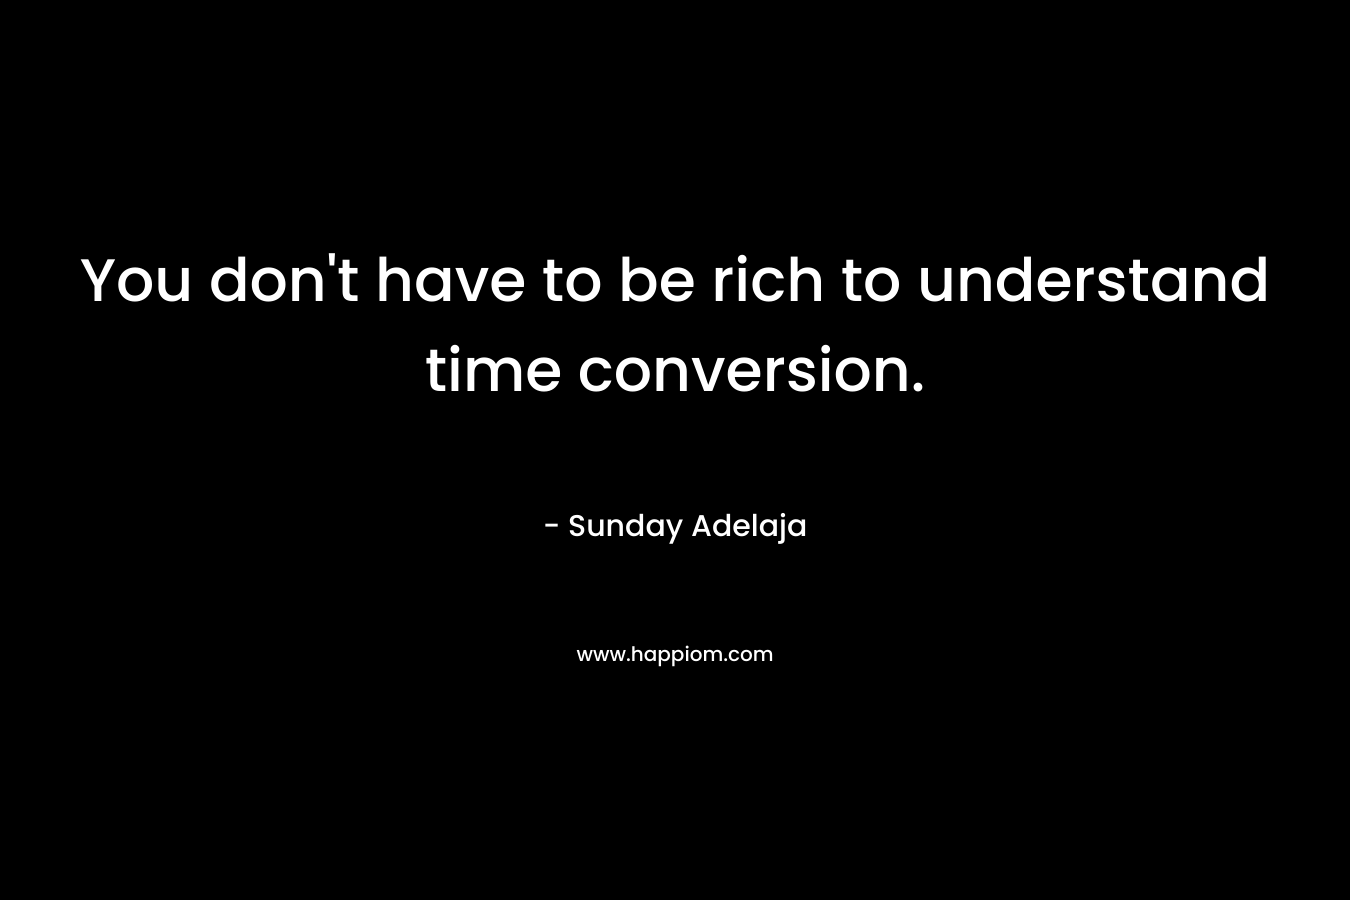 You don't have to be rich to understand time conversion.